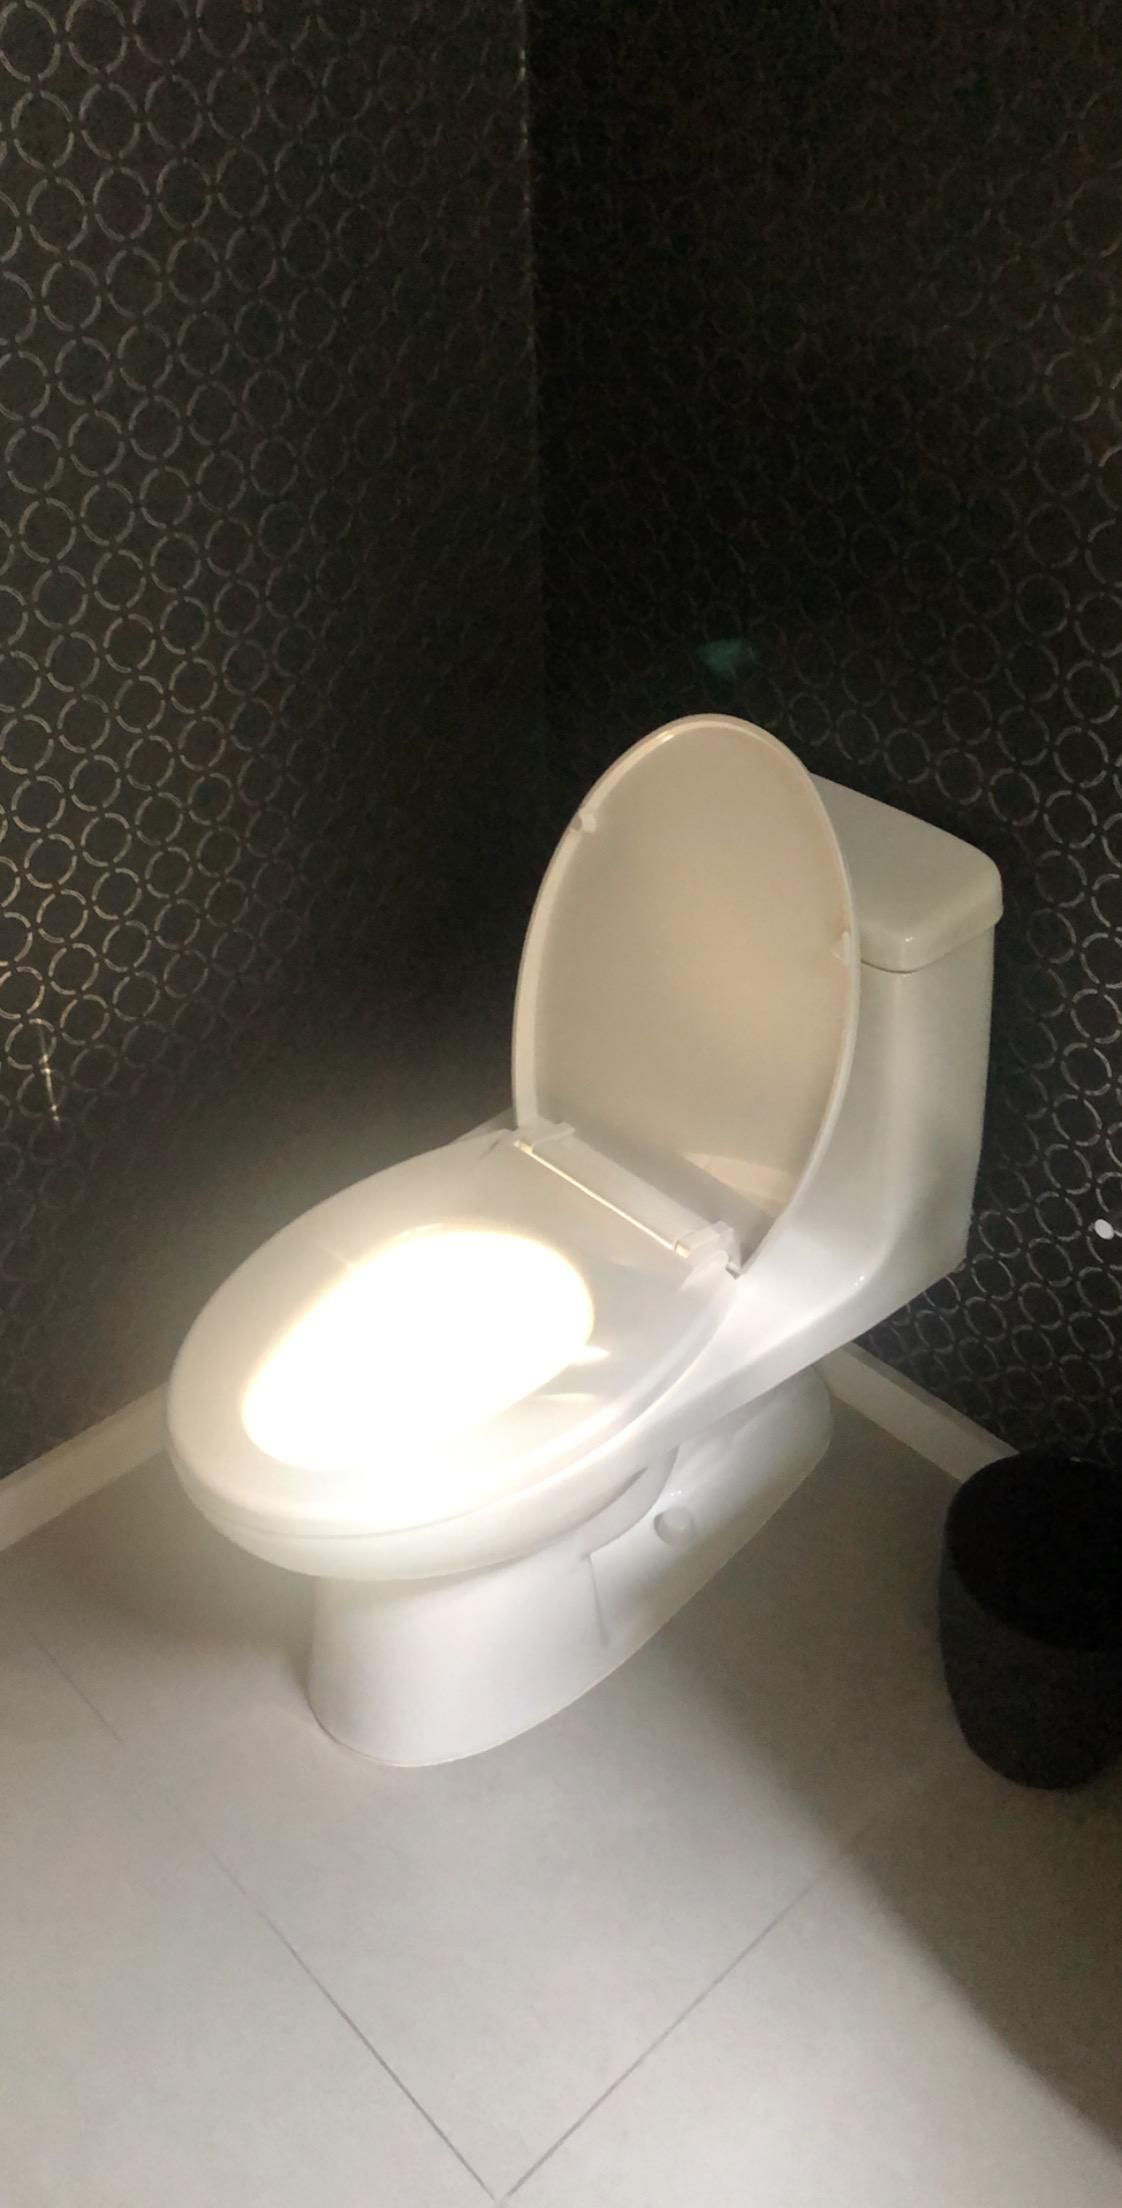 There’s a bathroom in my parent’s house that is lit by a single window and this is what happens every day.